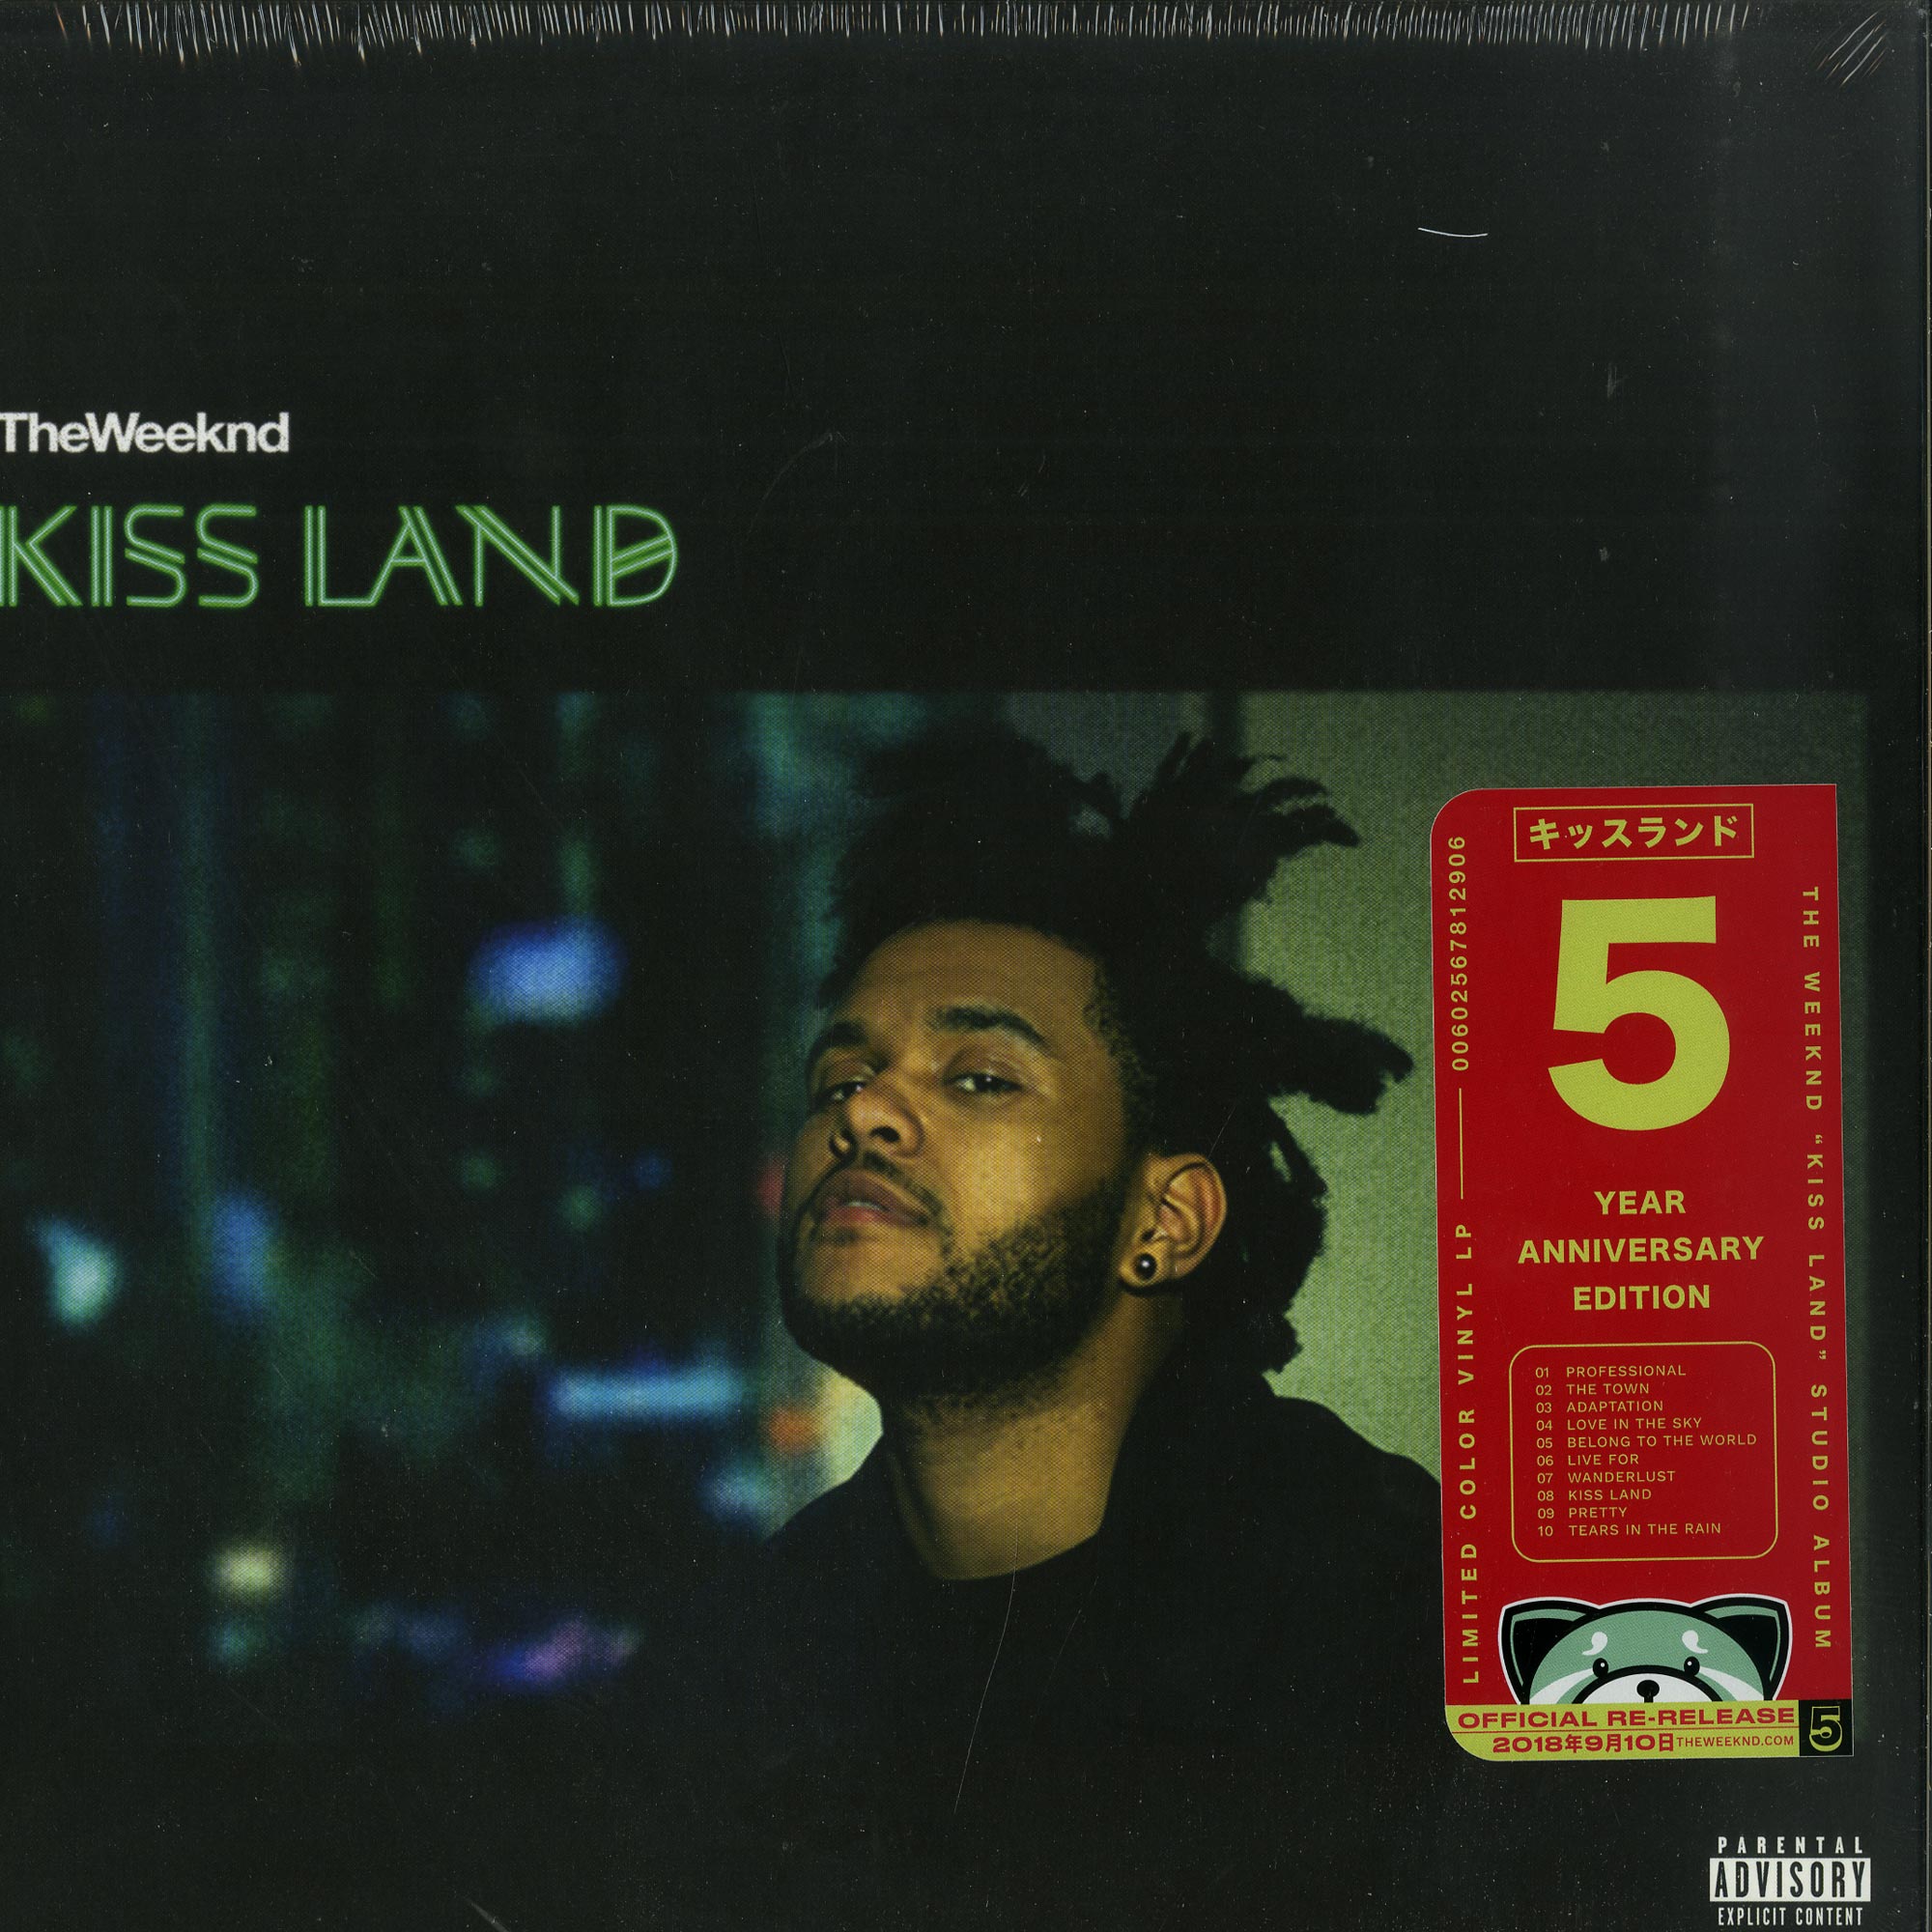 The Weeknd Kiss Land Vinyl A really good album with an amazing artwork desi...